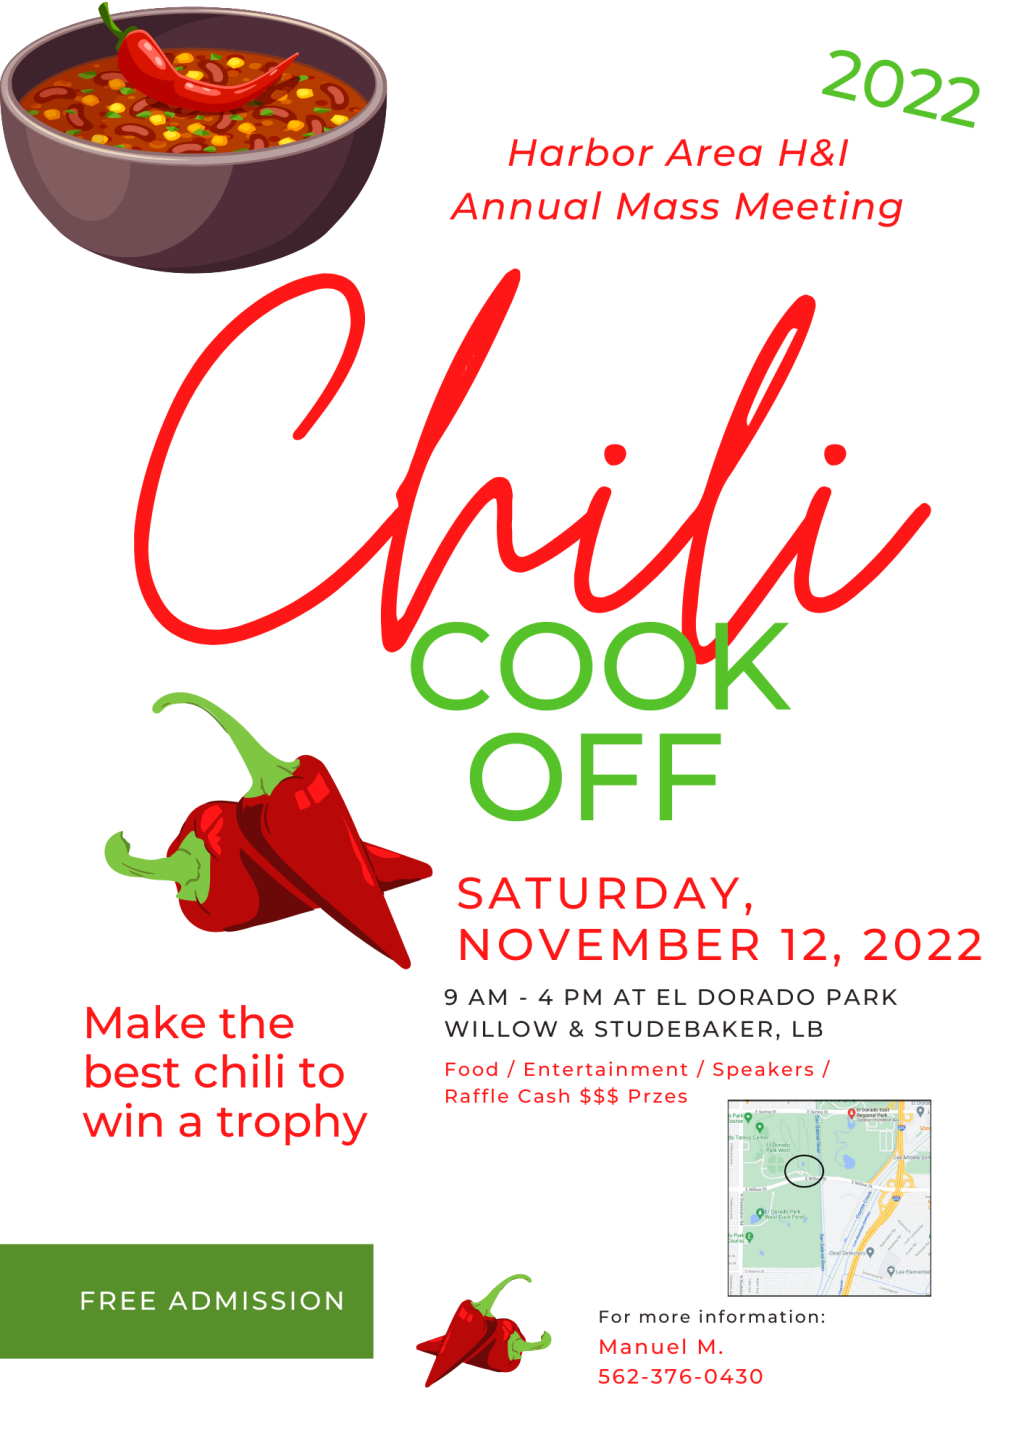 Chili Cook Off Flyer 2022 BW